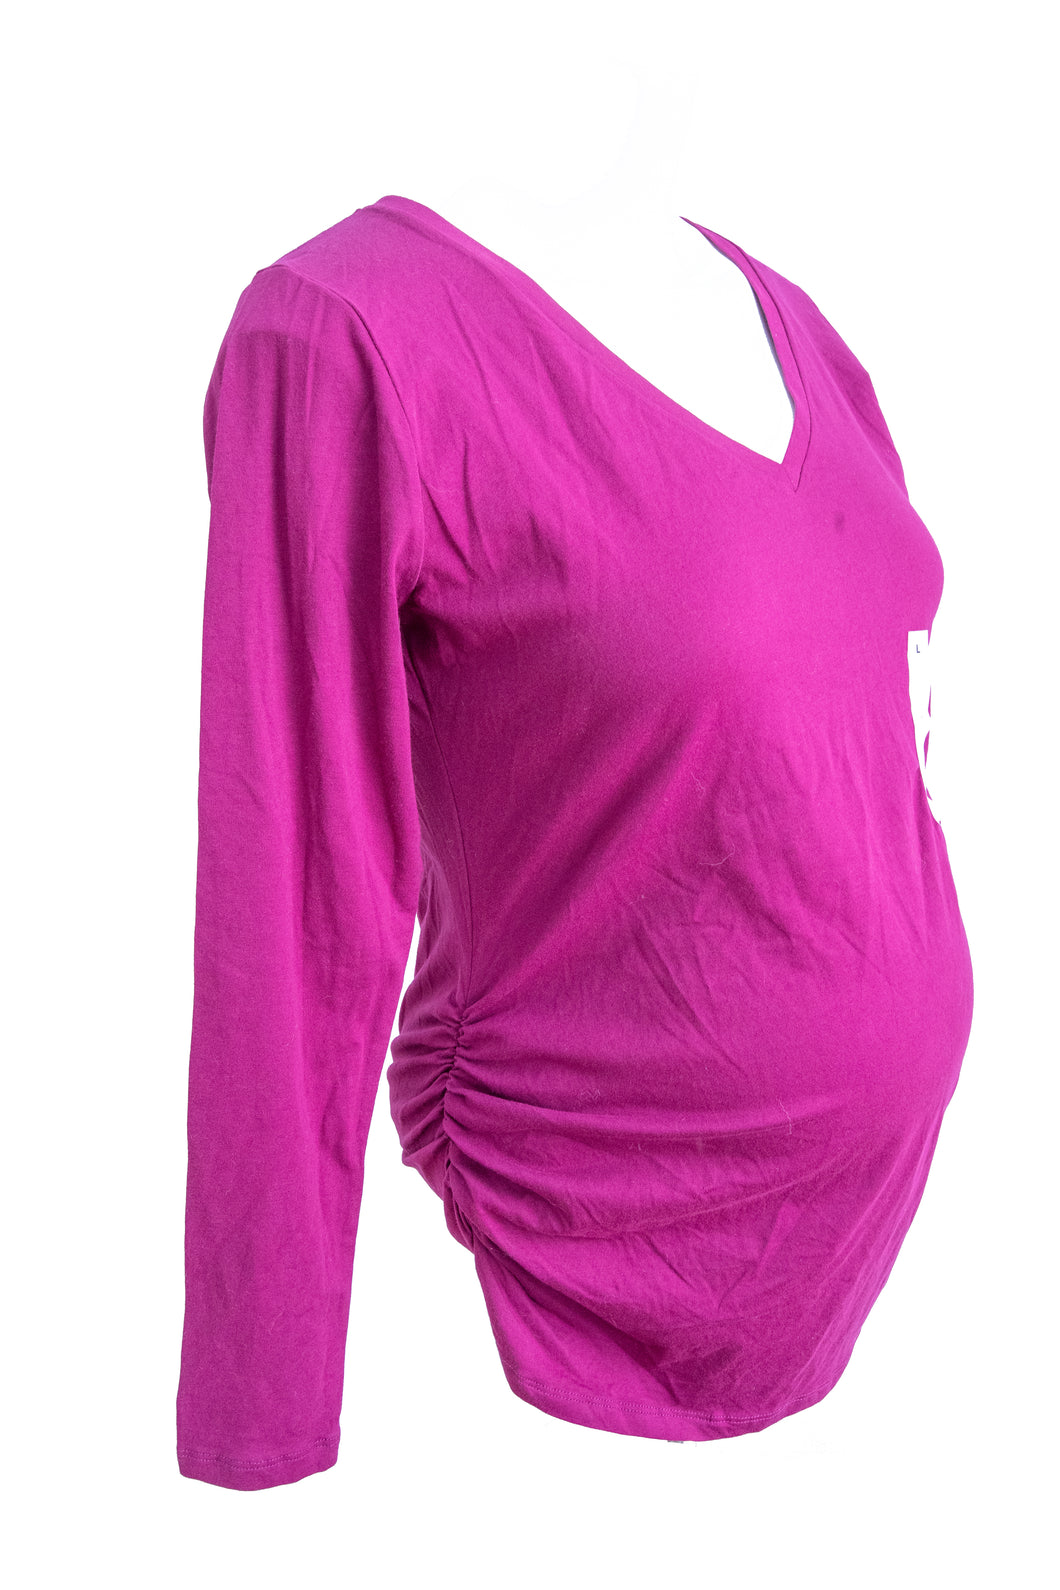 CLEARANCE *New* L Old Navy Maternity Long Sleeve top in Raspberry